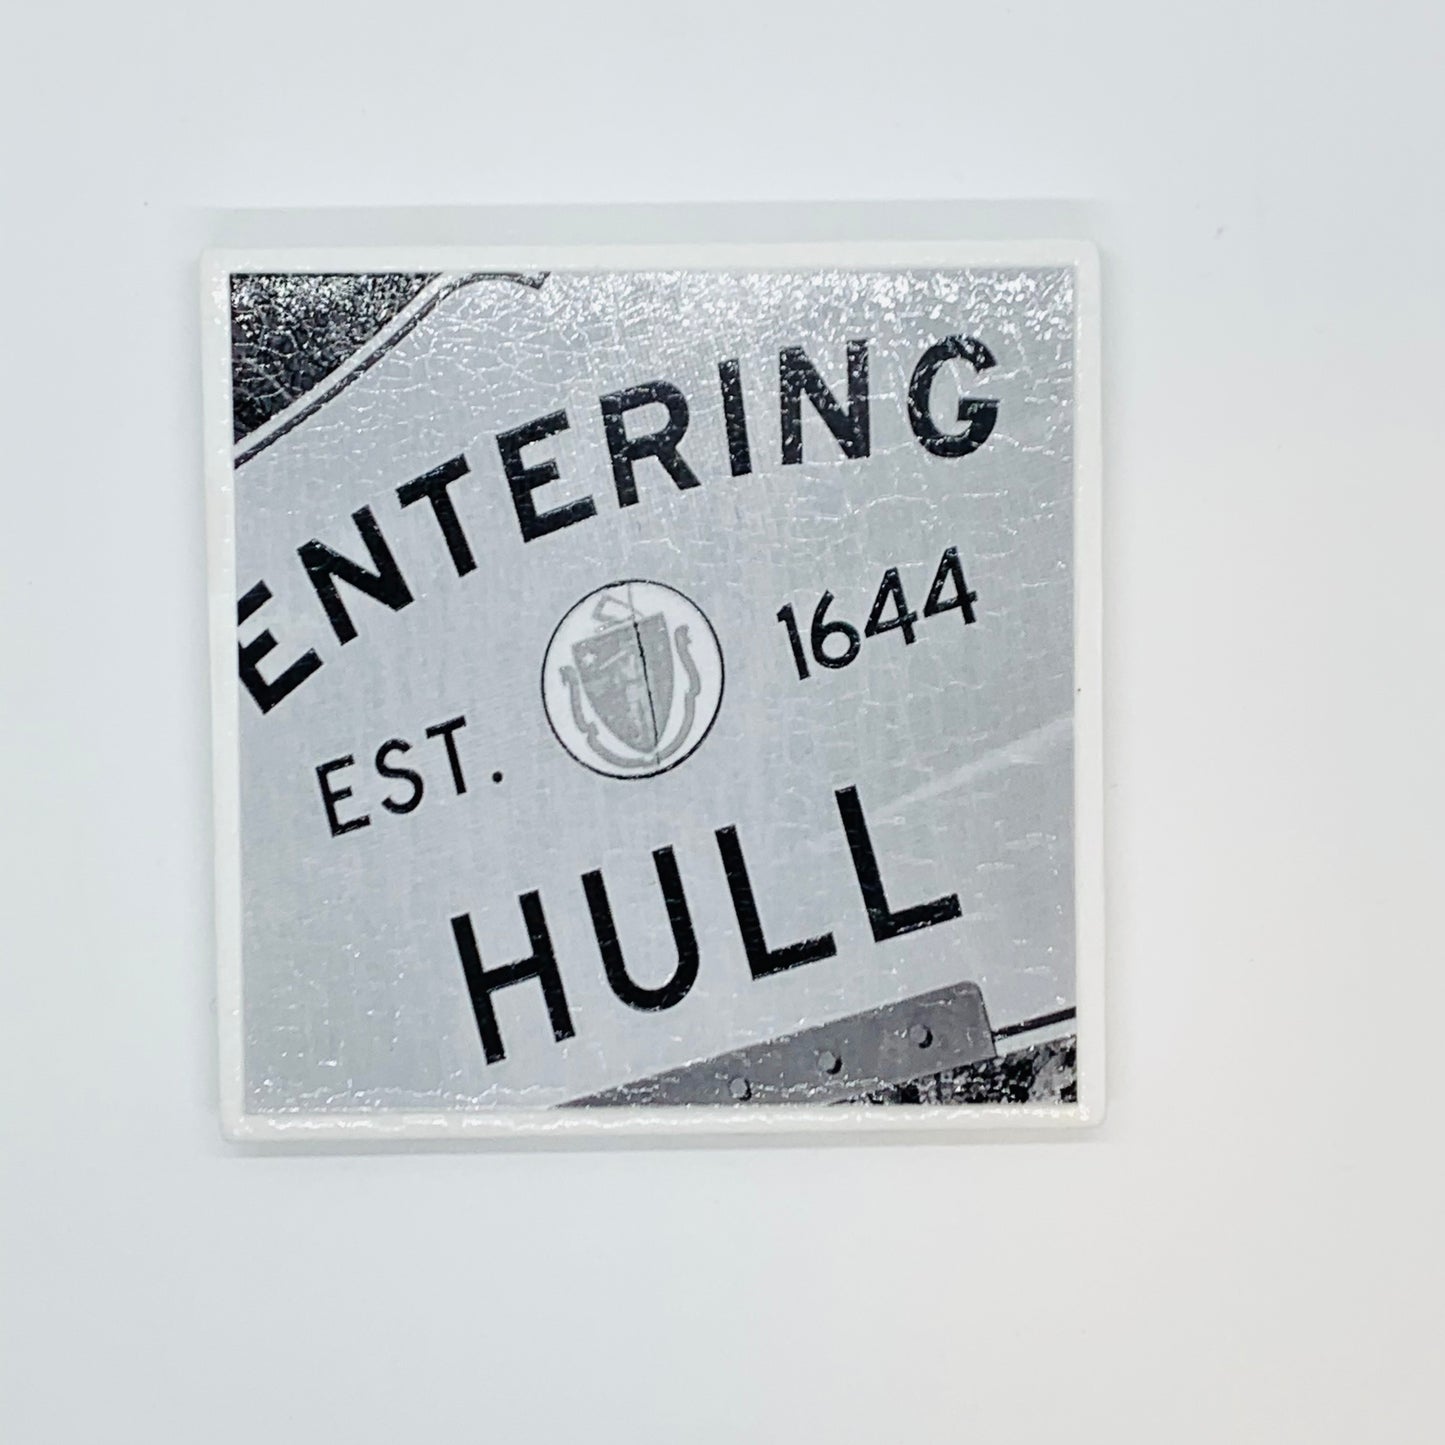 Coaster with black and white photo of the historic entering hull sign